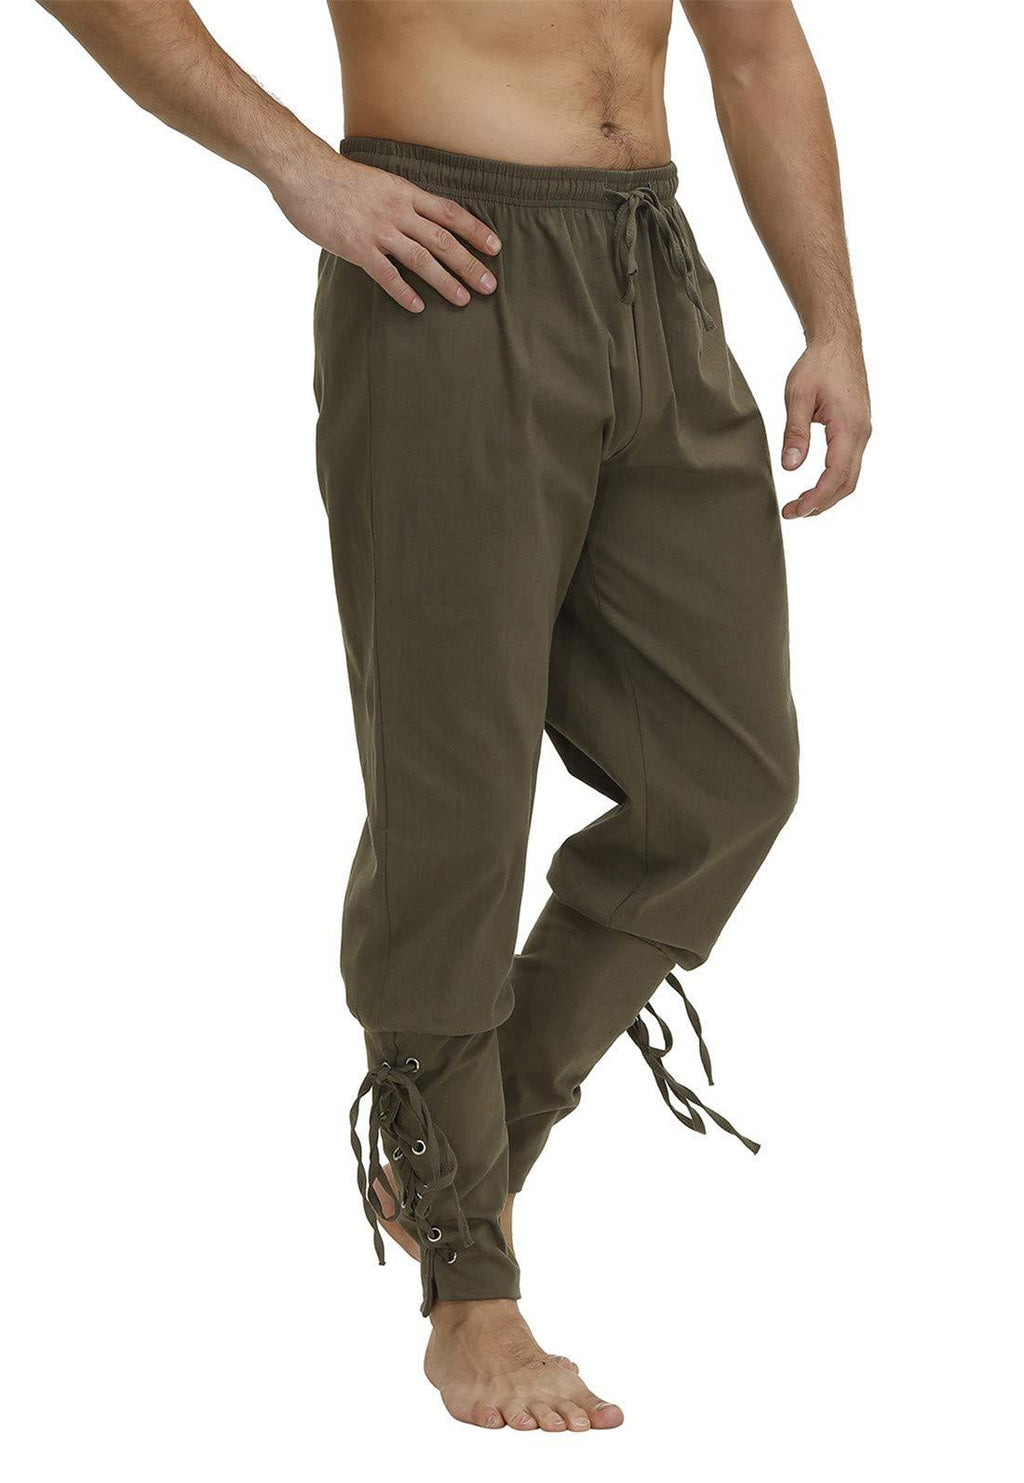 [Australia] - Men's Ankle Banded Cuff Renaissance Pants Medieval Viking Navigator Trousers Pirate Cosplay Costume with Drawstrings Small Men-amy Green 